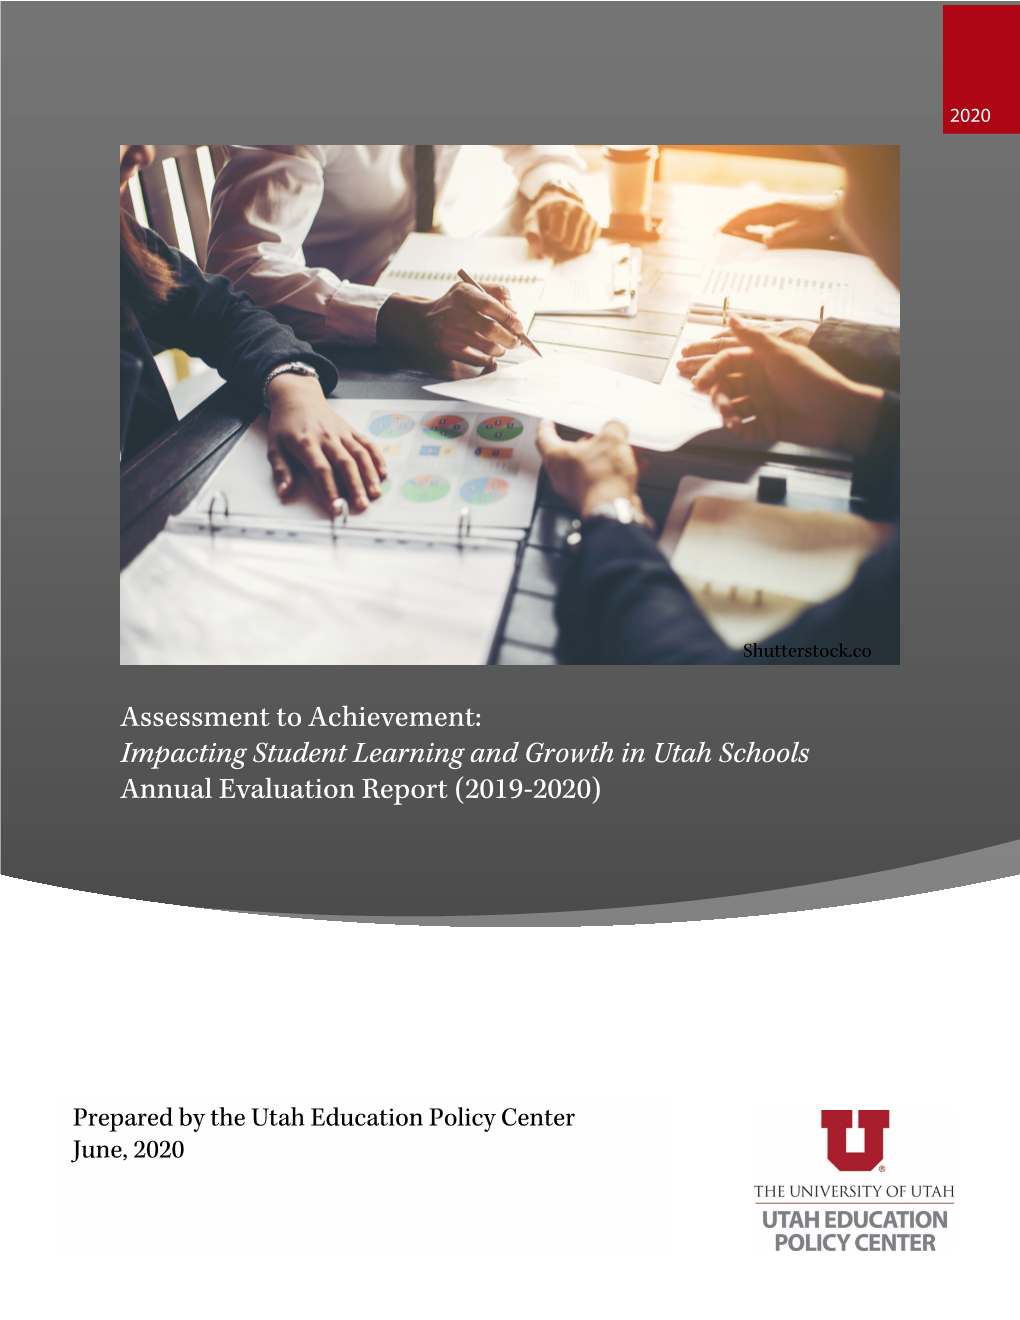 Impacting Student Learning and Growth in Utah Schools Annual Evaluation Report (2019-2020)